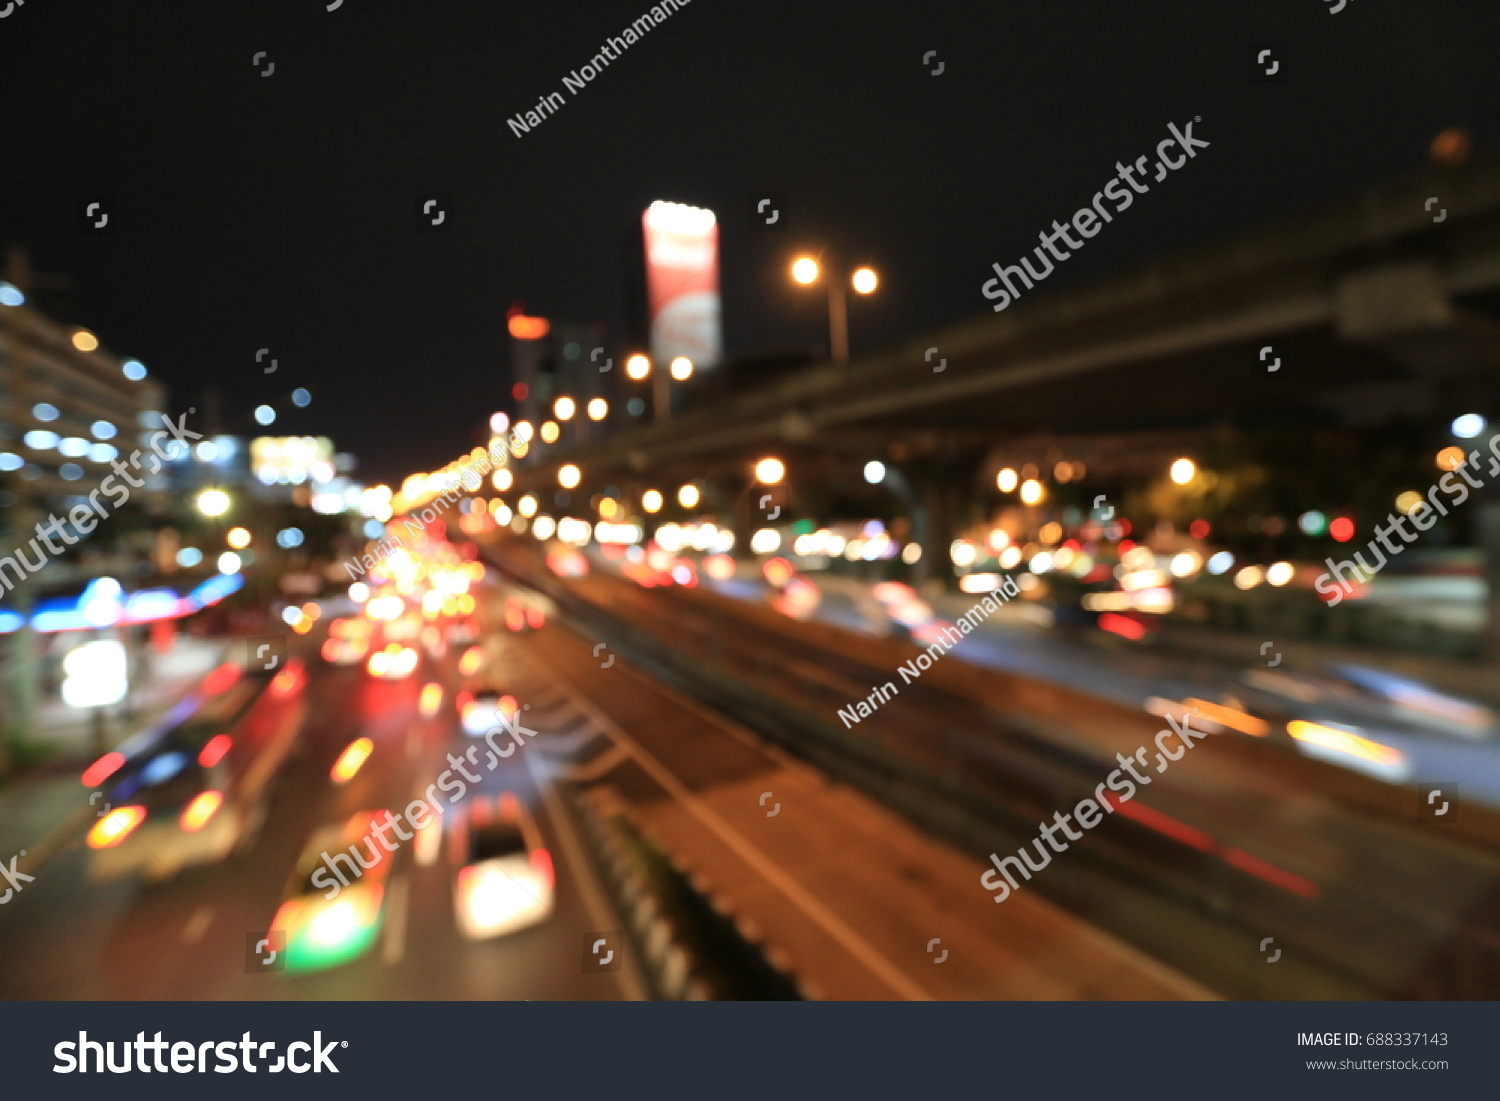 Abstract circular bokeh motion lens blur backround of city and street light at blue night time in Thailand. #688337143